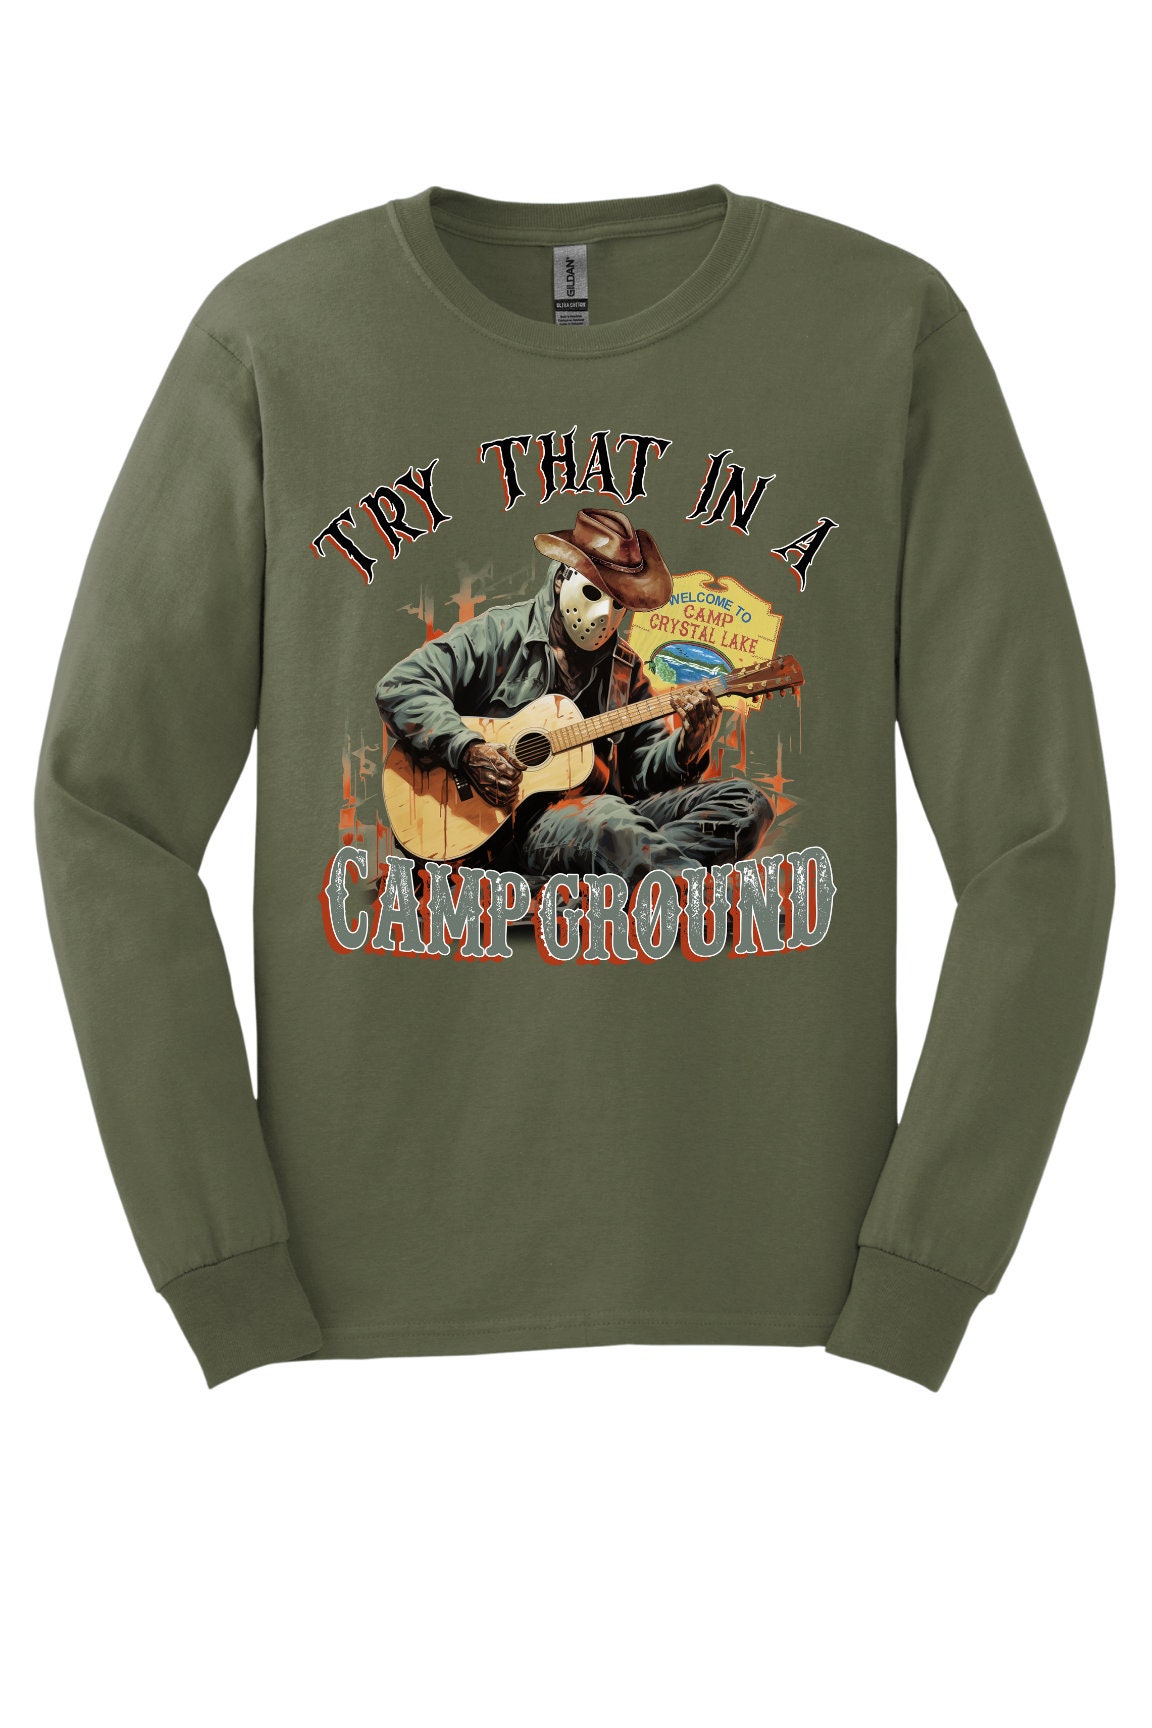 Try That In a Campground Halloween Long Sleeve Shirt, Cotton Adult Tee